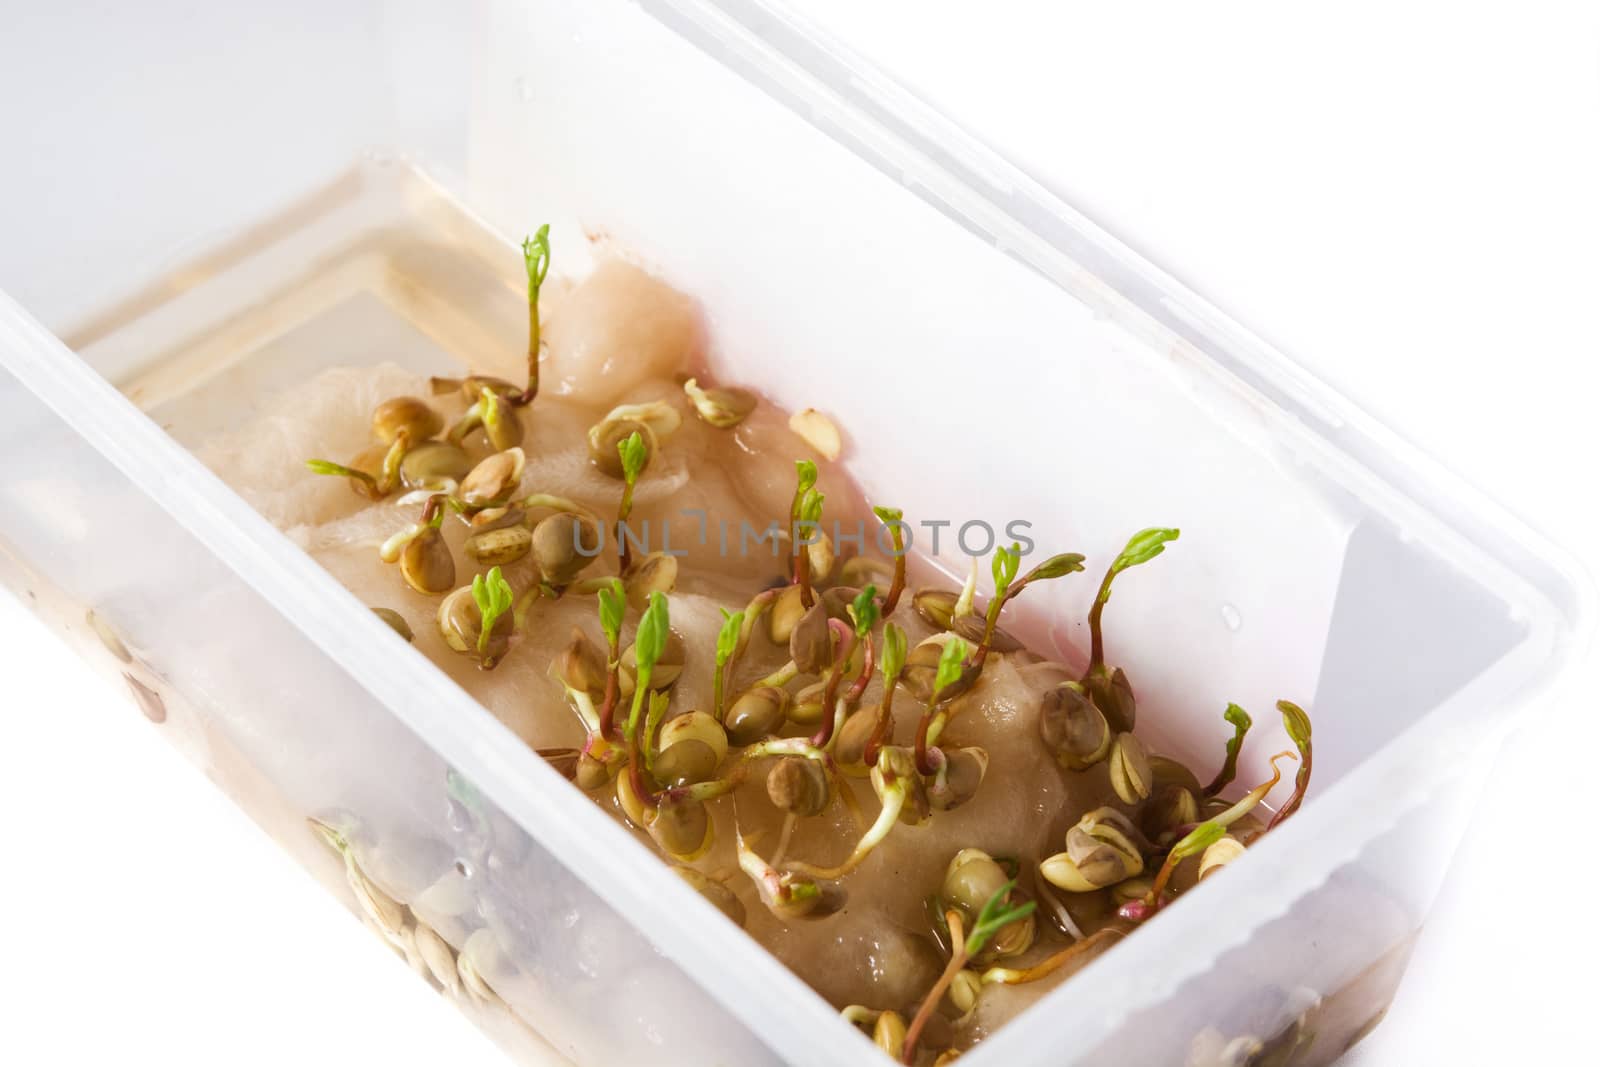 Lentils sprouting with cotton in plastic container by chandlervid85